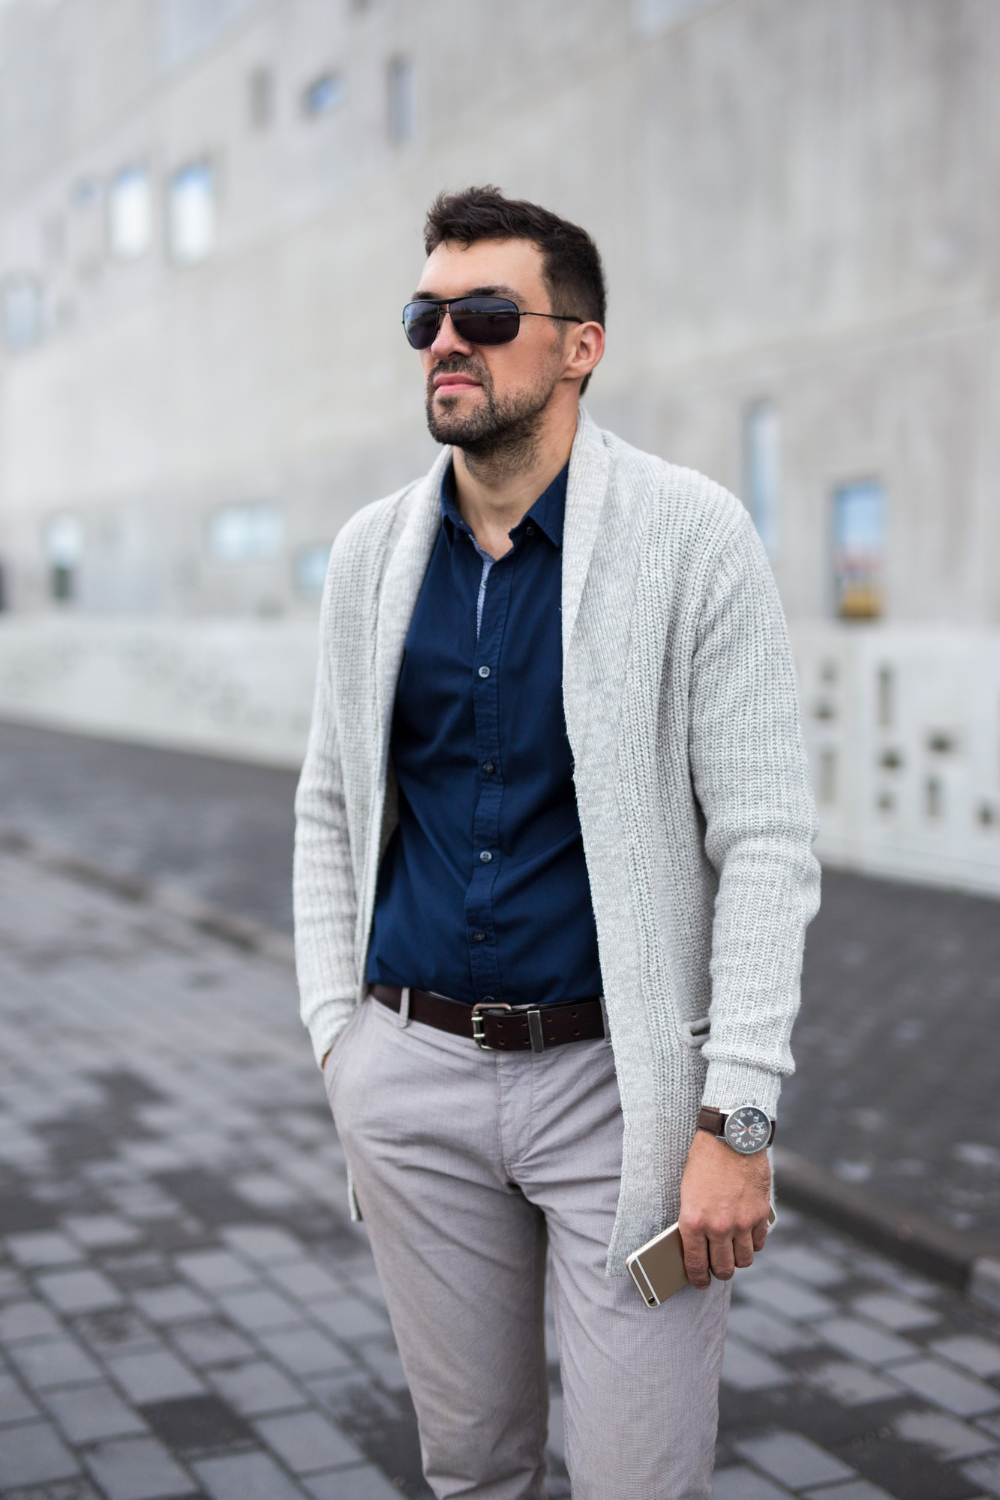 Matching colors and patterns between a sweater and a dress shirt